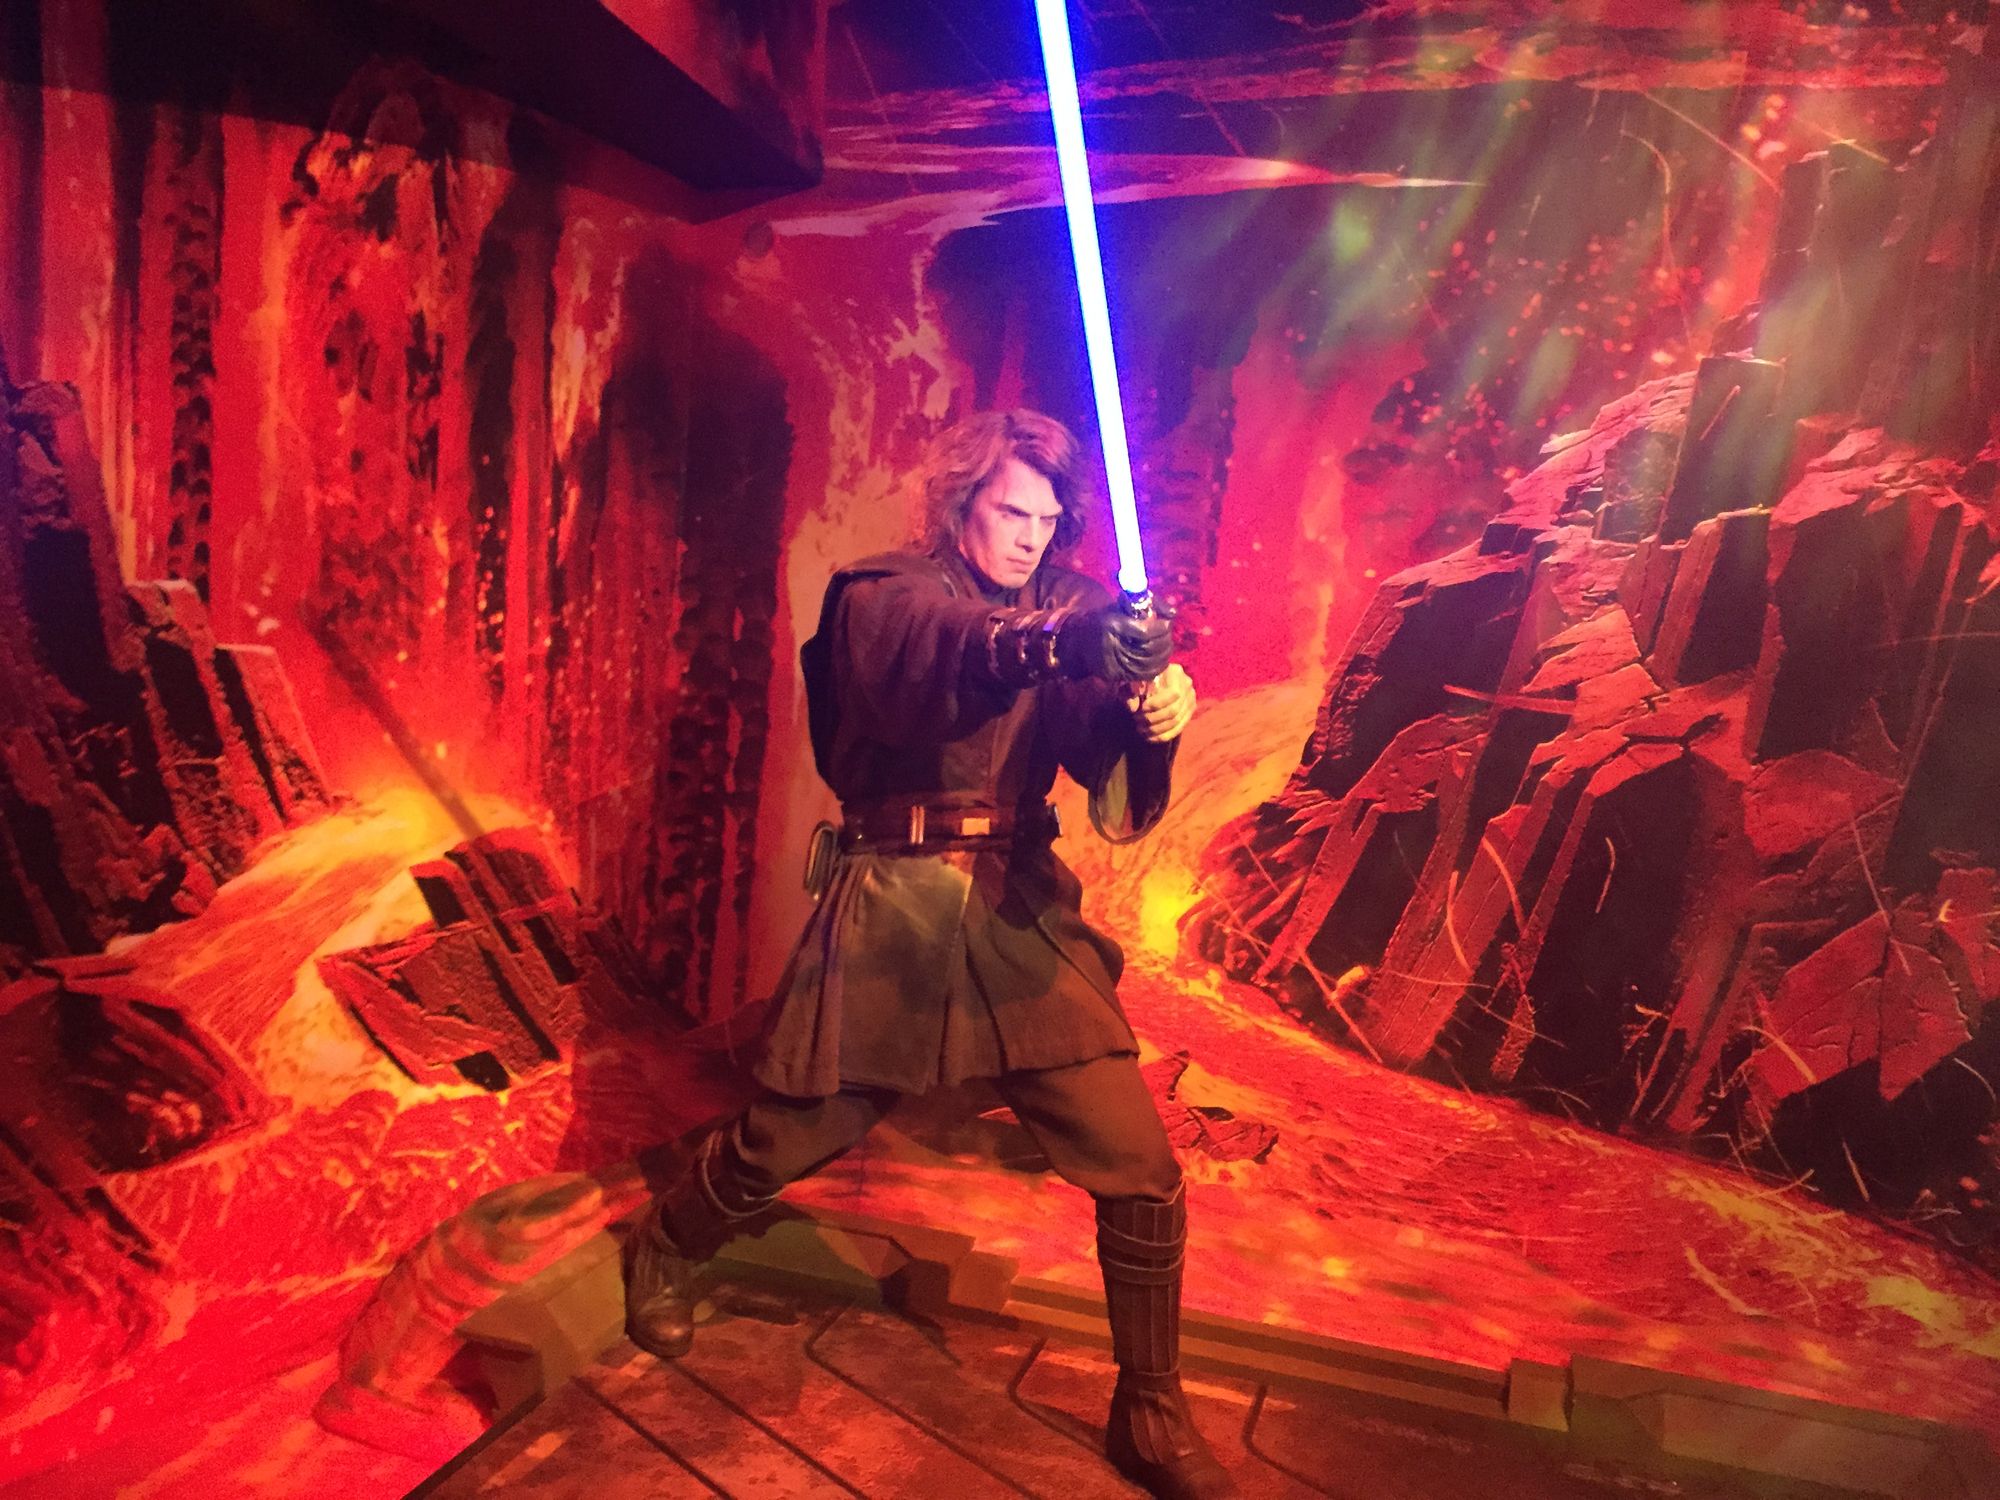 Star Wars comes to Madame Tussauds